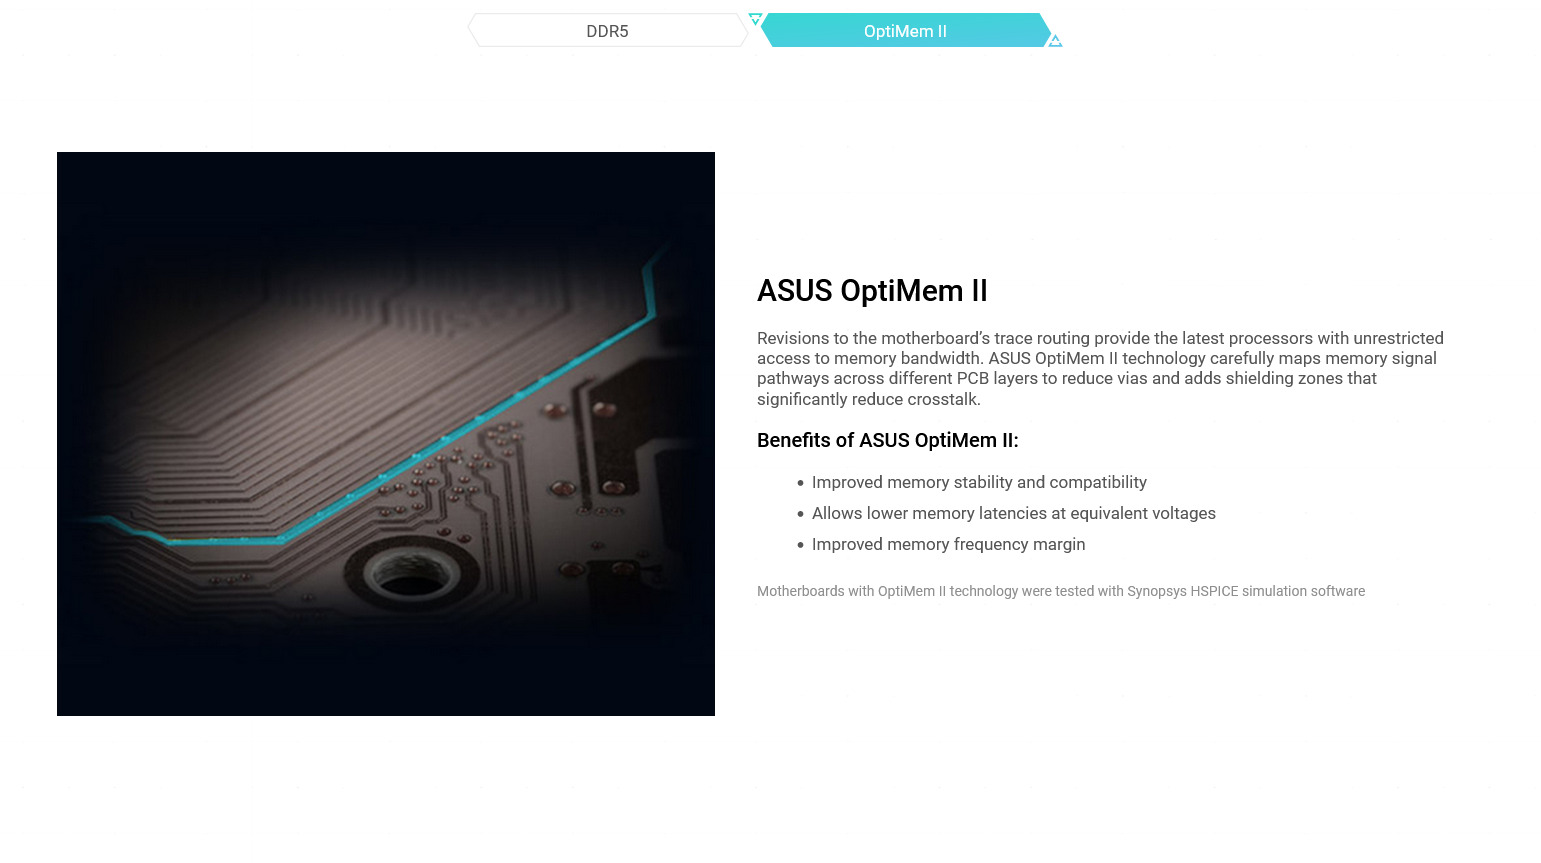 A large marketing image providing additional information about the product ASUS A620M-AYW WiFi AM5 mATX Desktop Motherboard - Additional alt info not provided